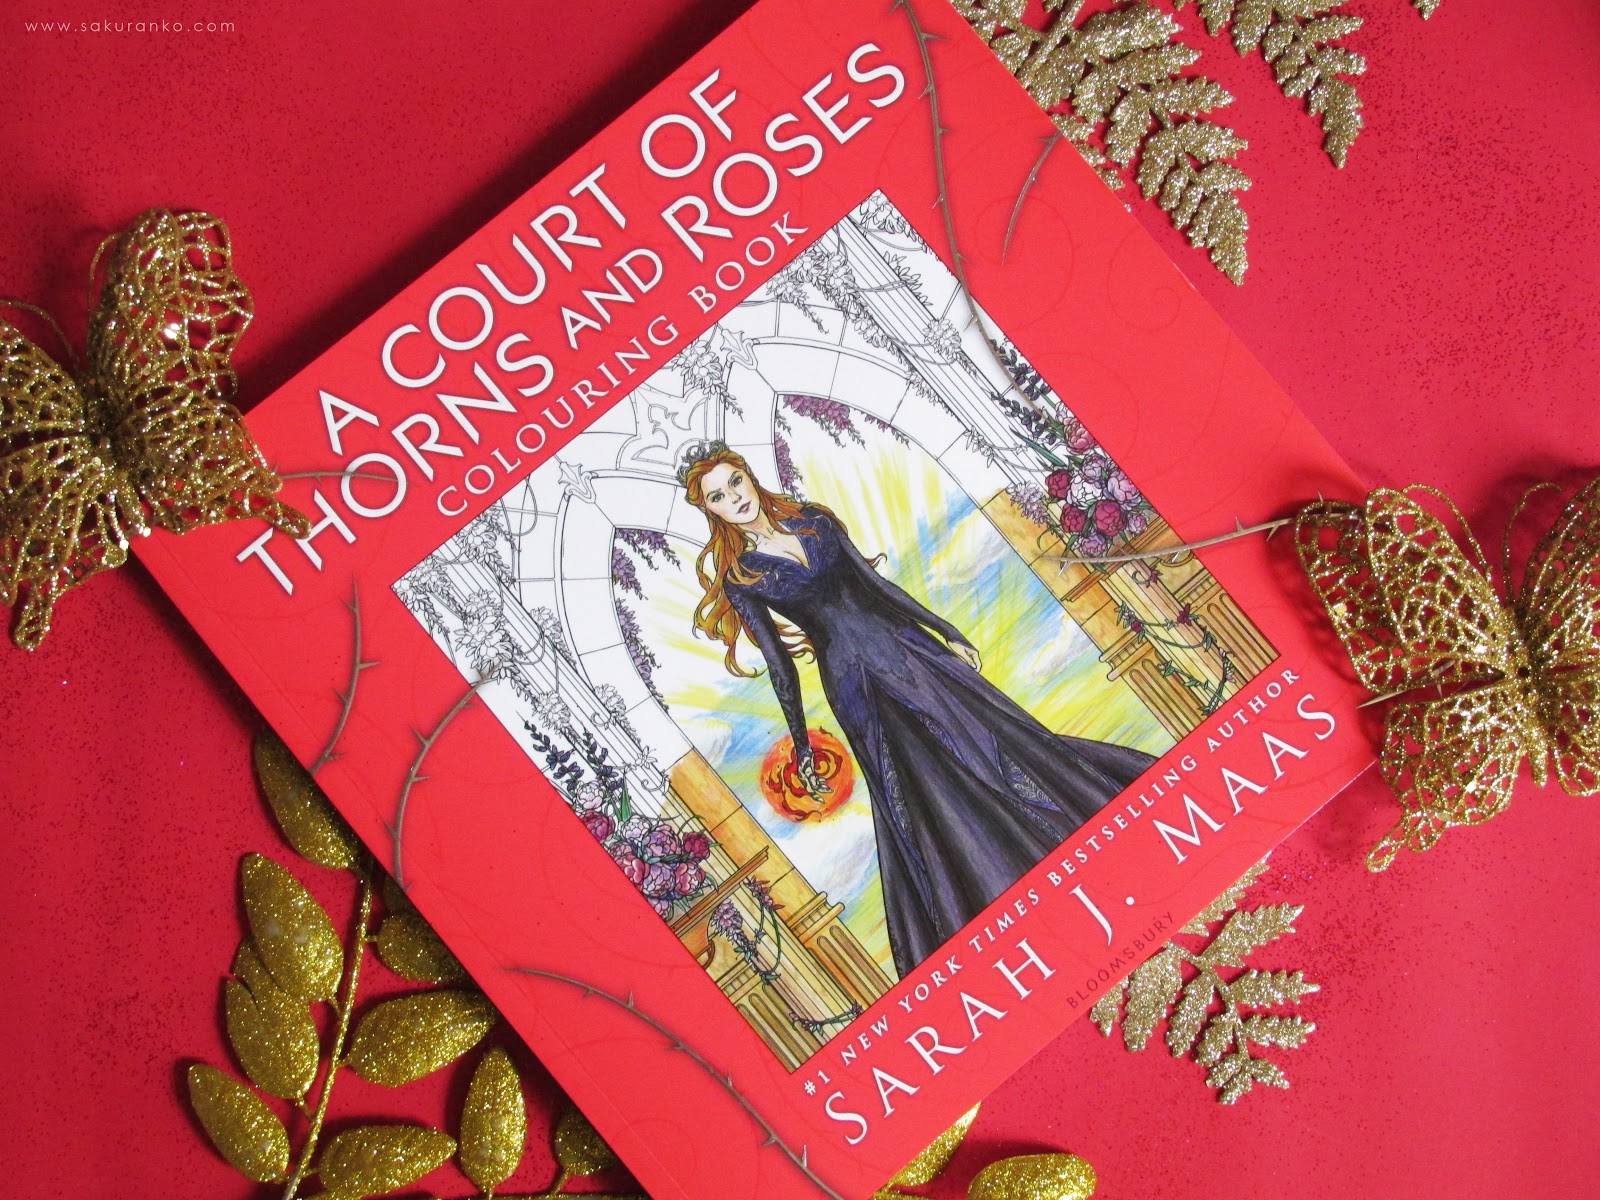 A Court of Thorns and Roses Coloring Book Review - Sarah J. Maas 🌹 